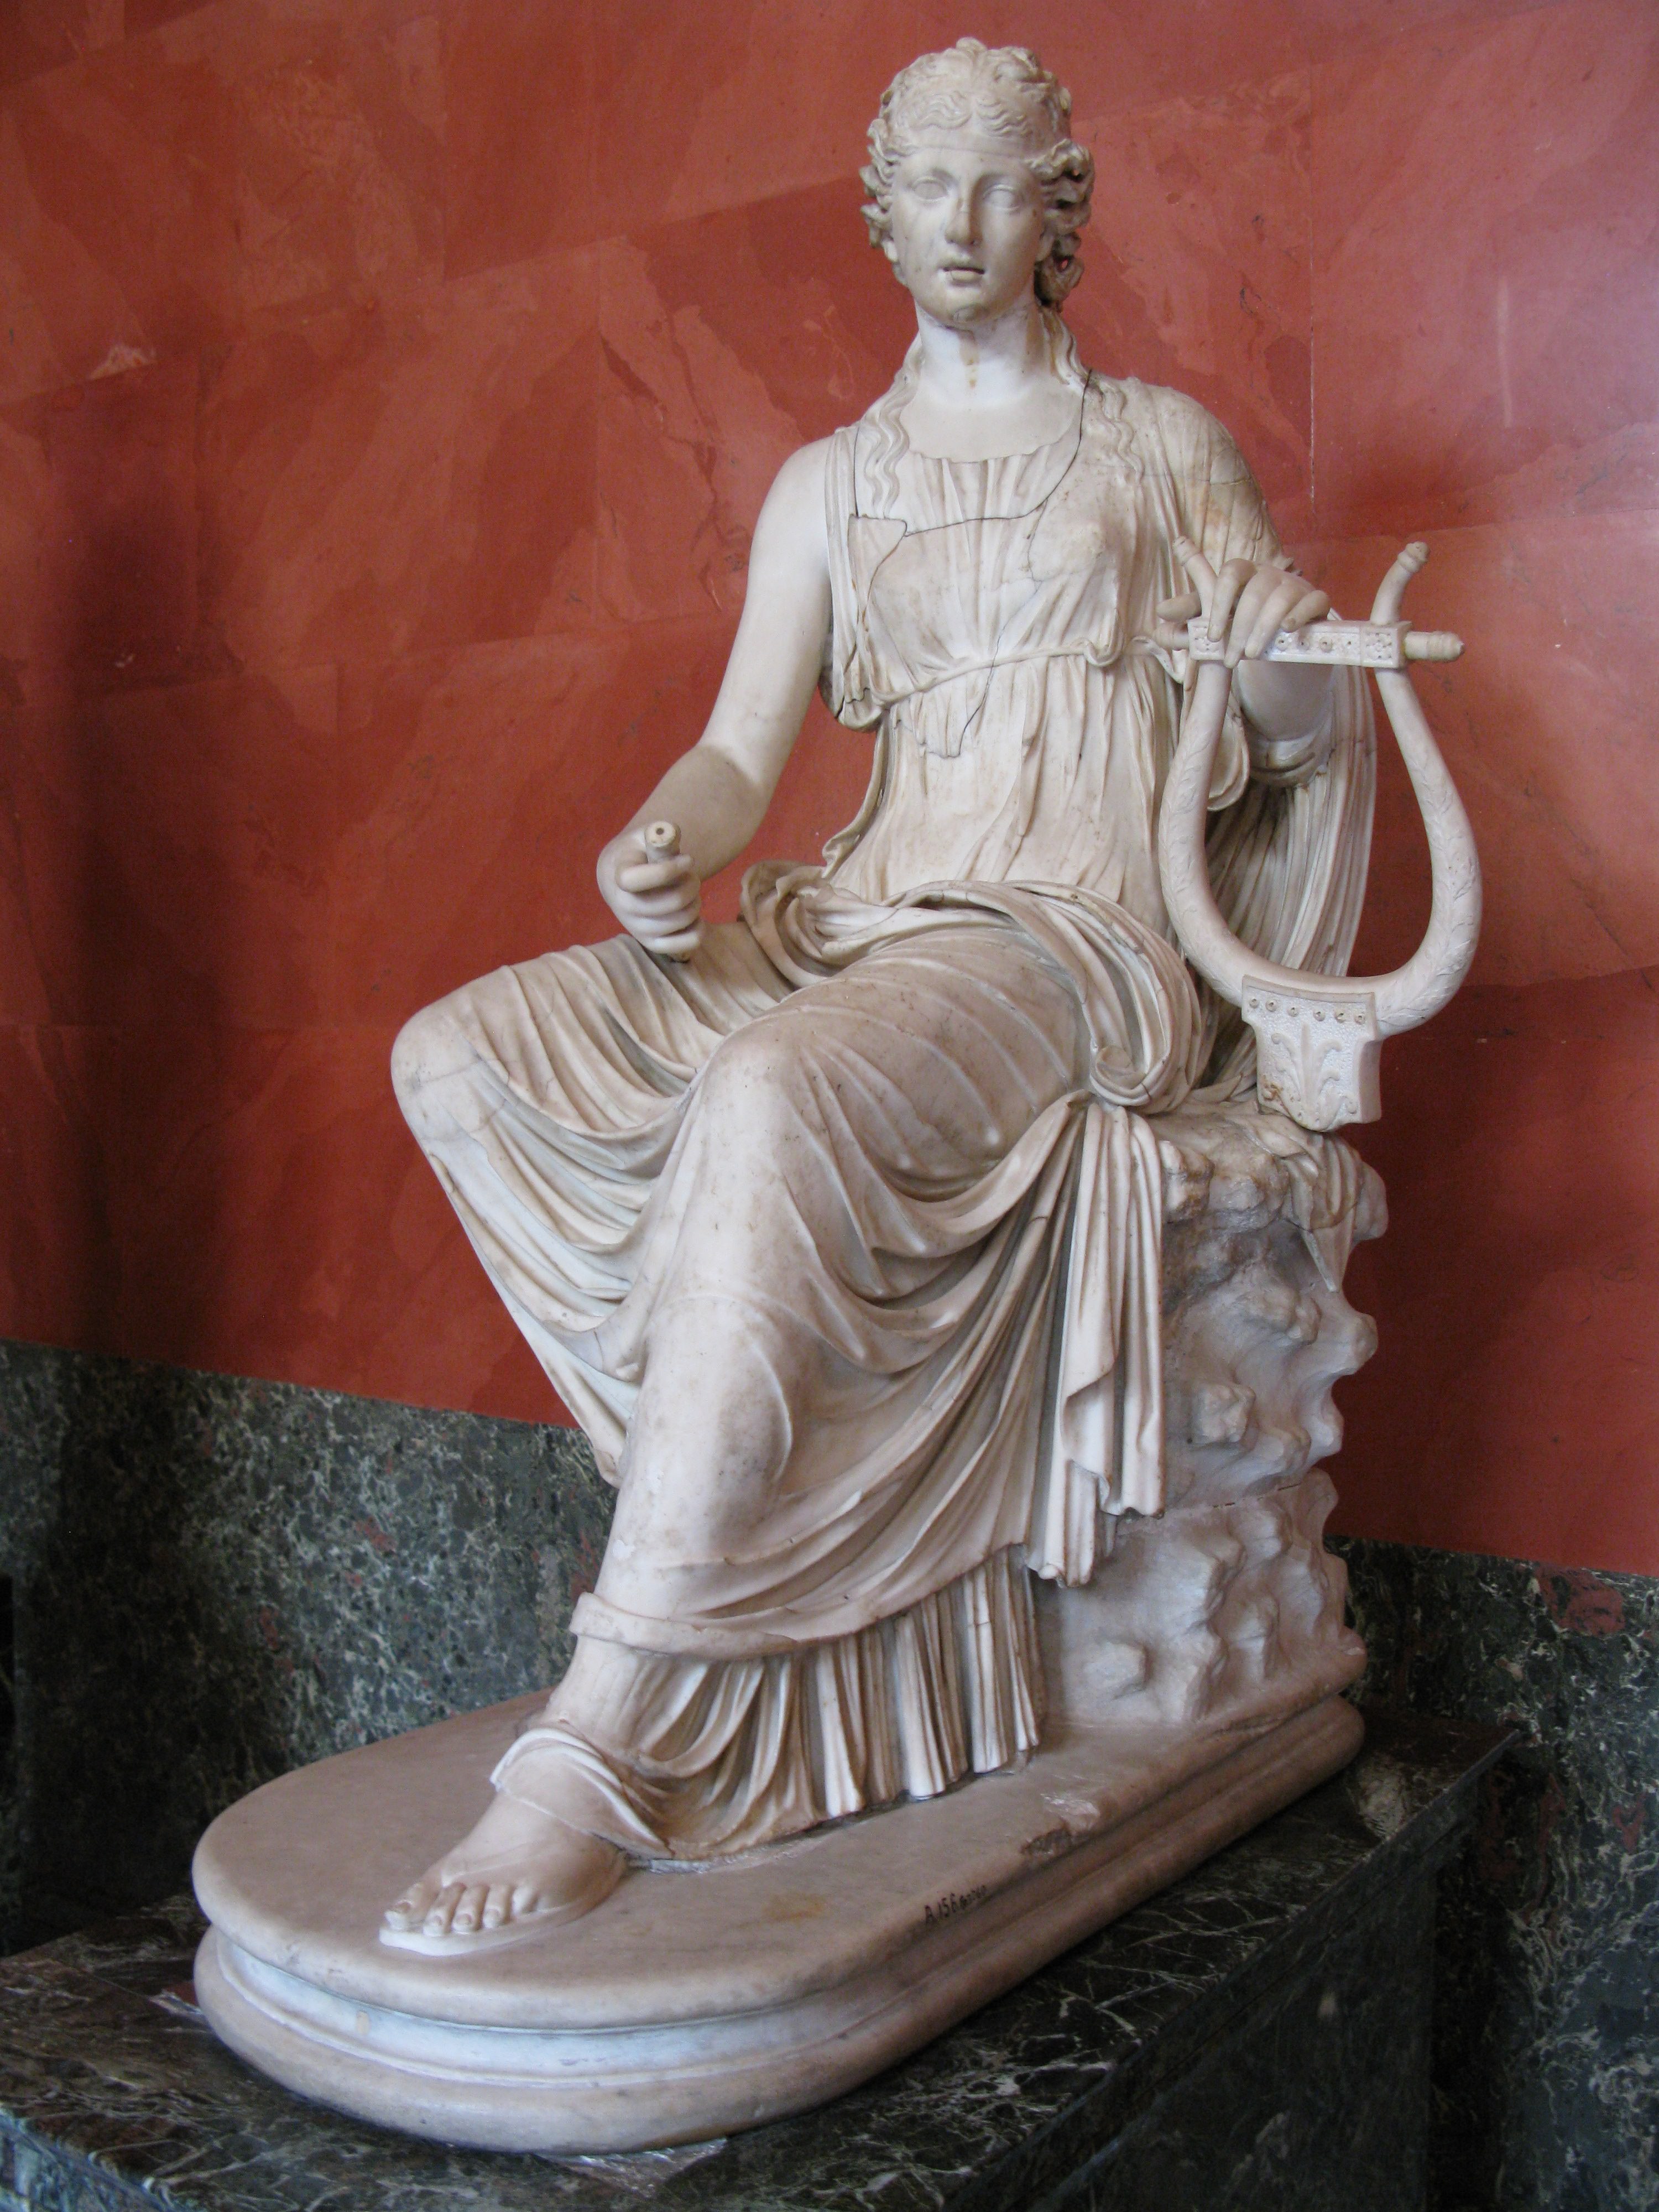 Terpsichore, with her lyre.